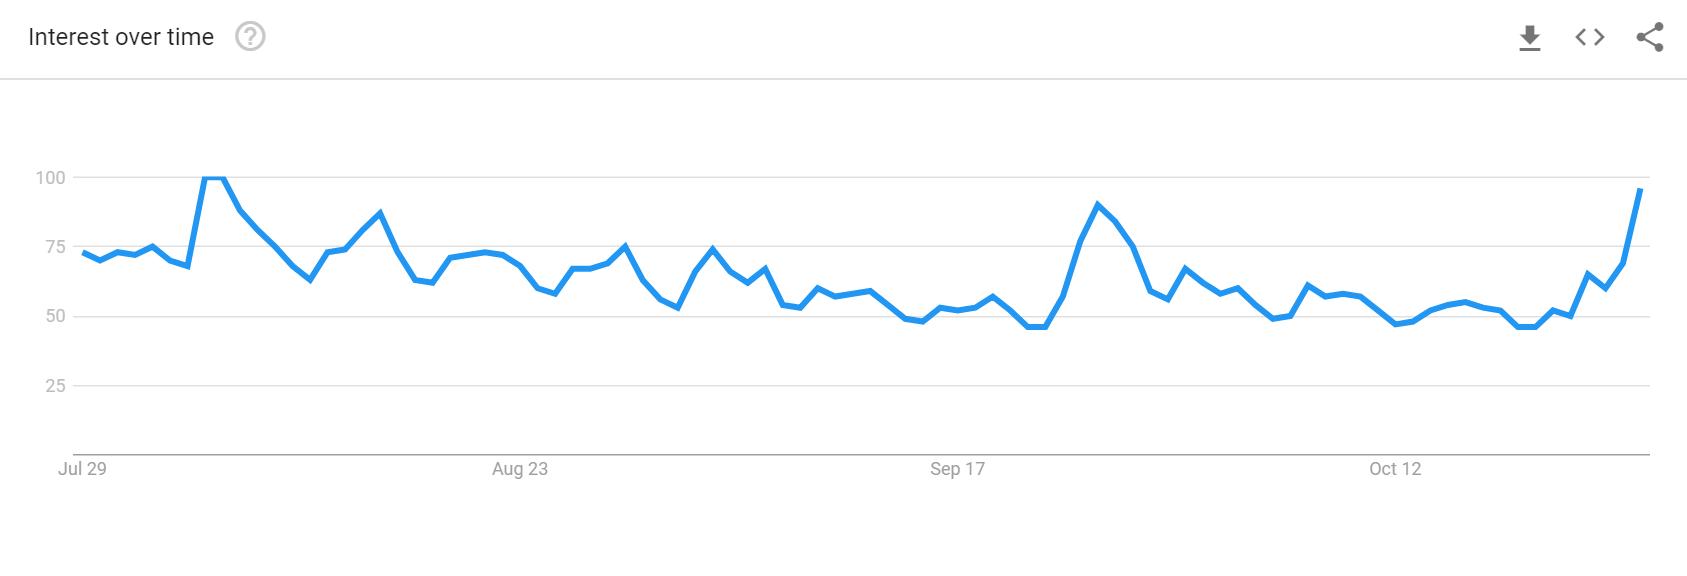 Bitcoin Interest Surges On Google As Searches Hit Rocket High Levels